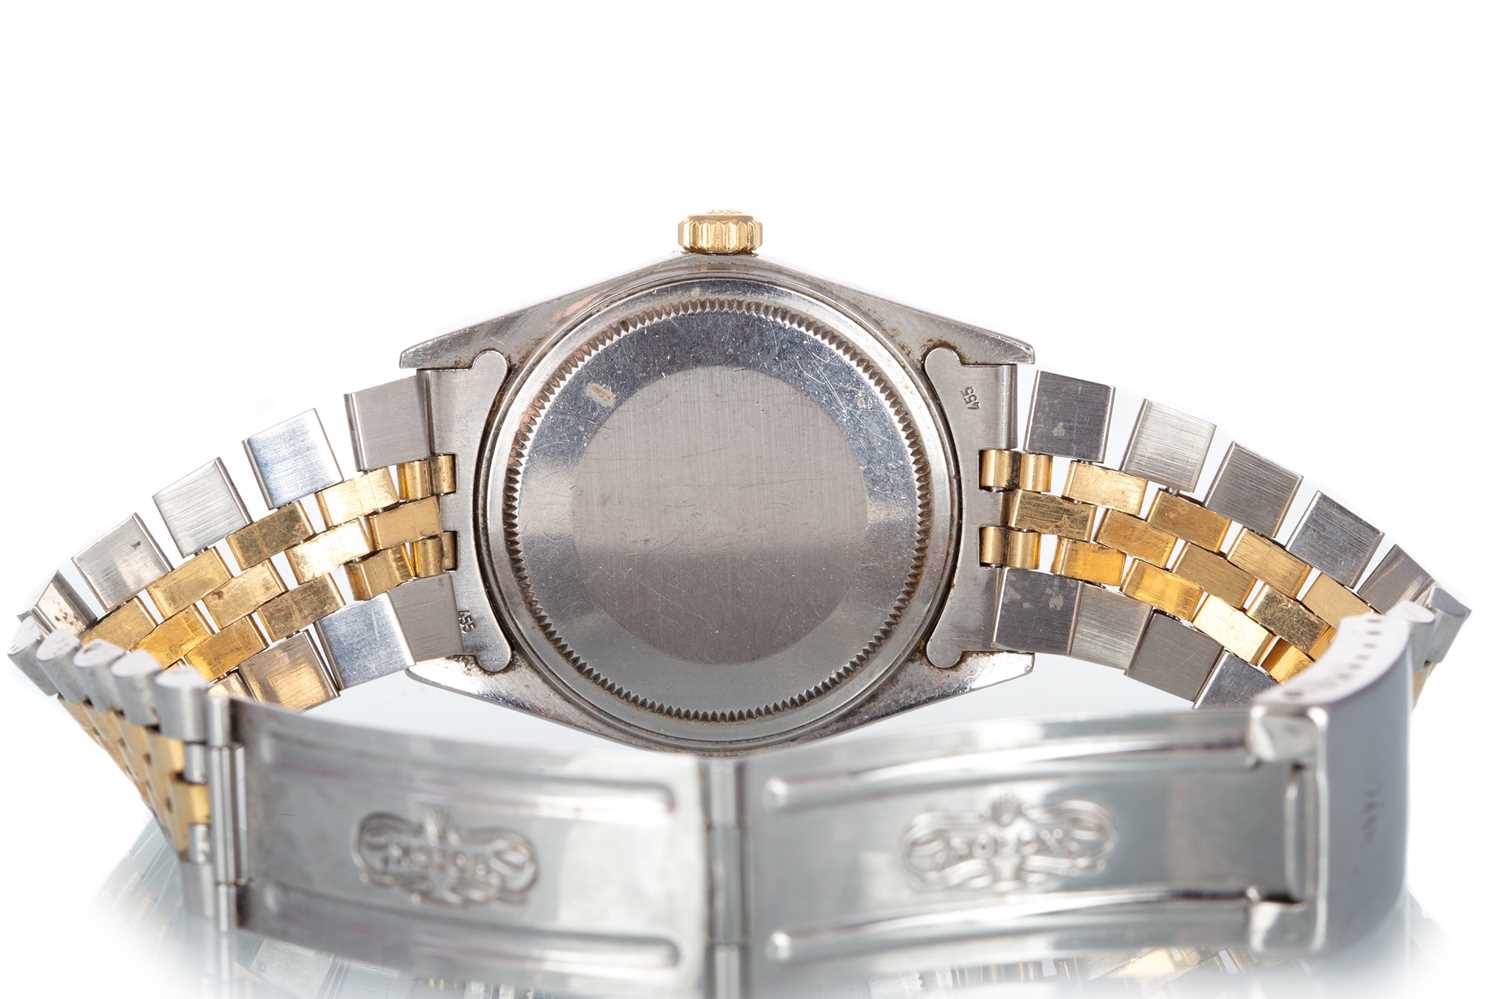 ROLEX, OYSTER PERPETUAL DATEJUST STAINLESS STEEL AUTOMATIC WRIST WATCH - Image 3 of 3